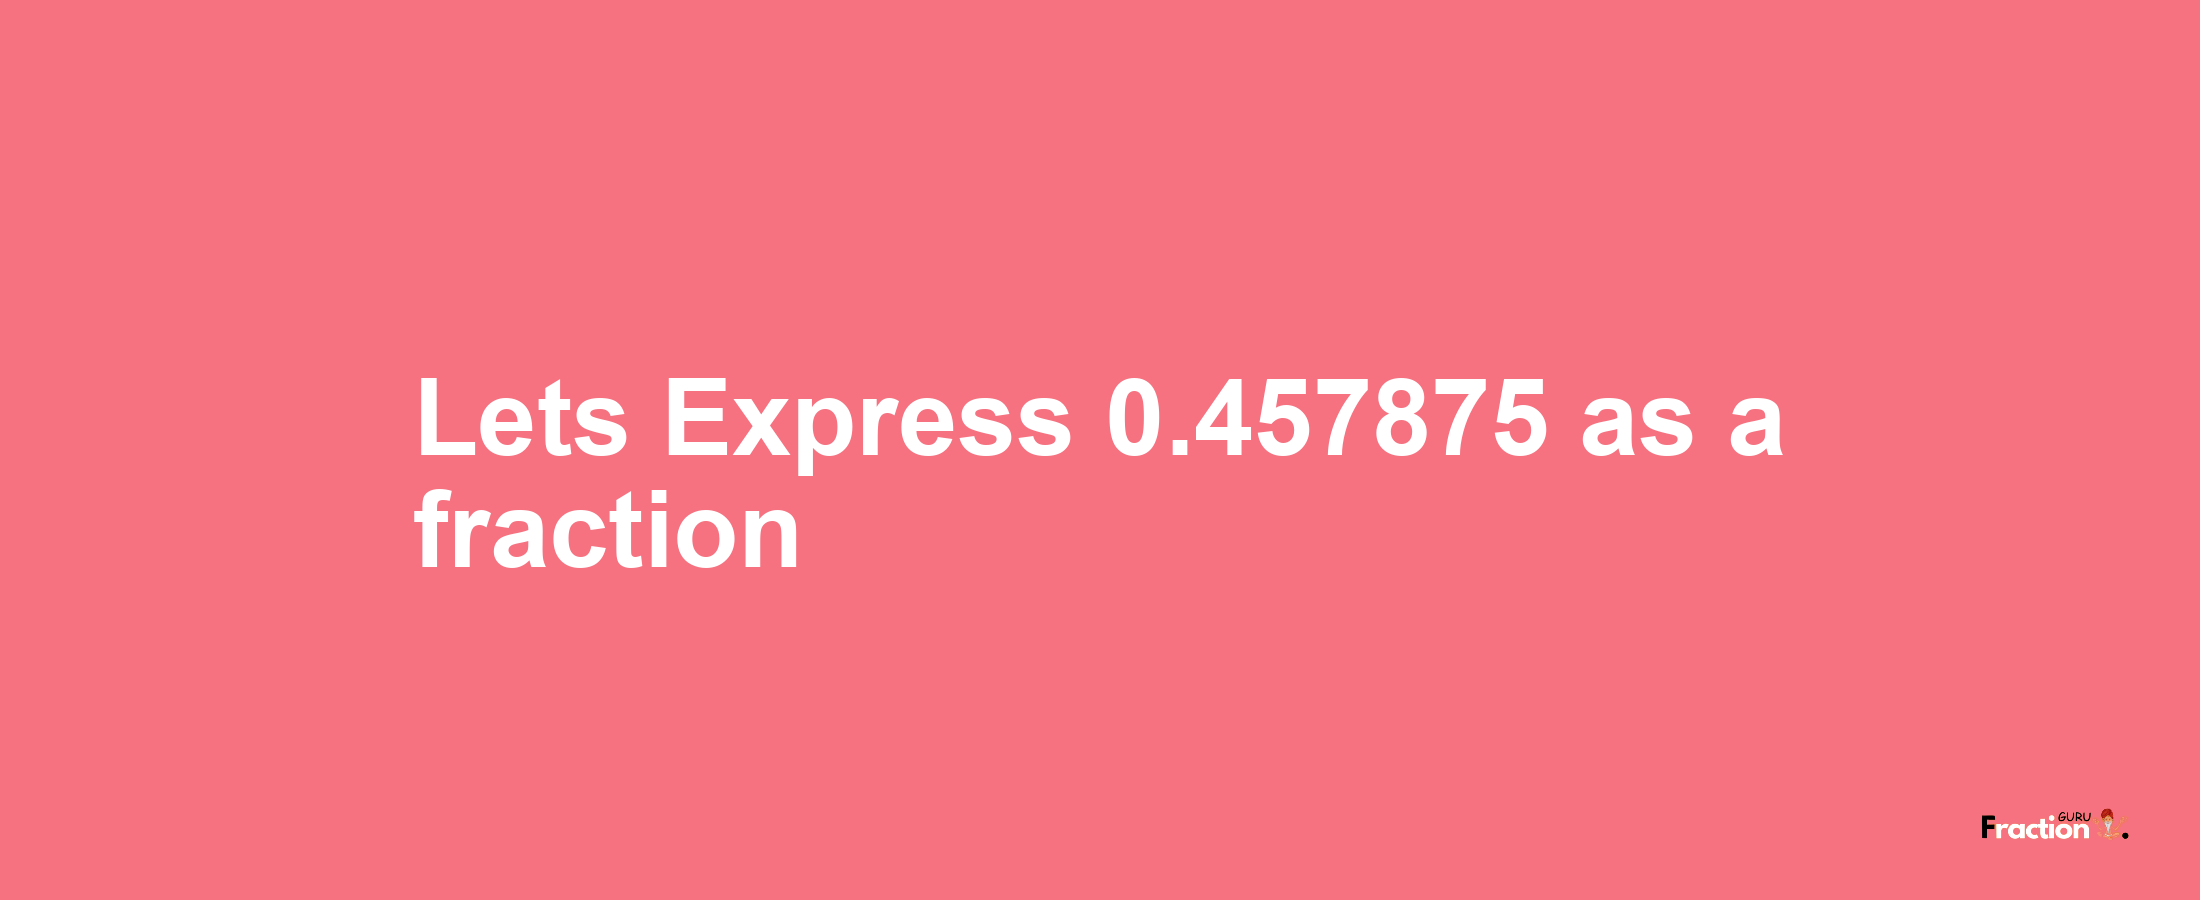 Lets Express 0.457875 as afraction